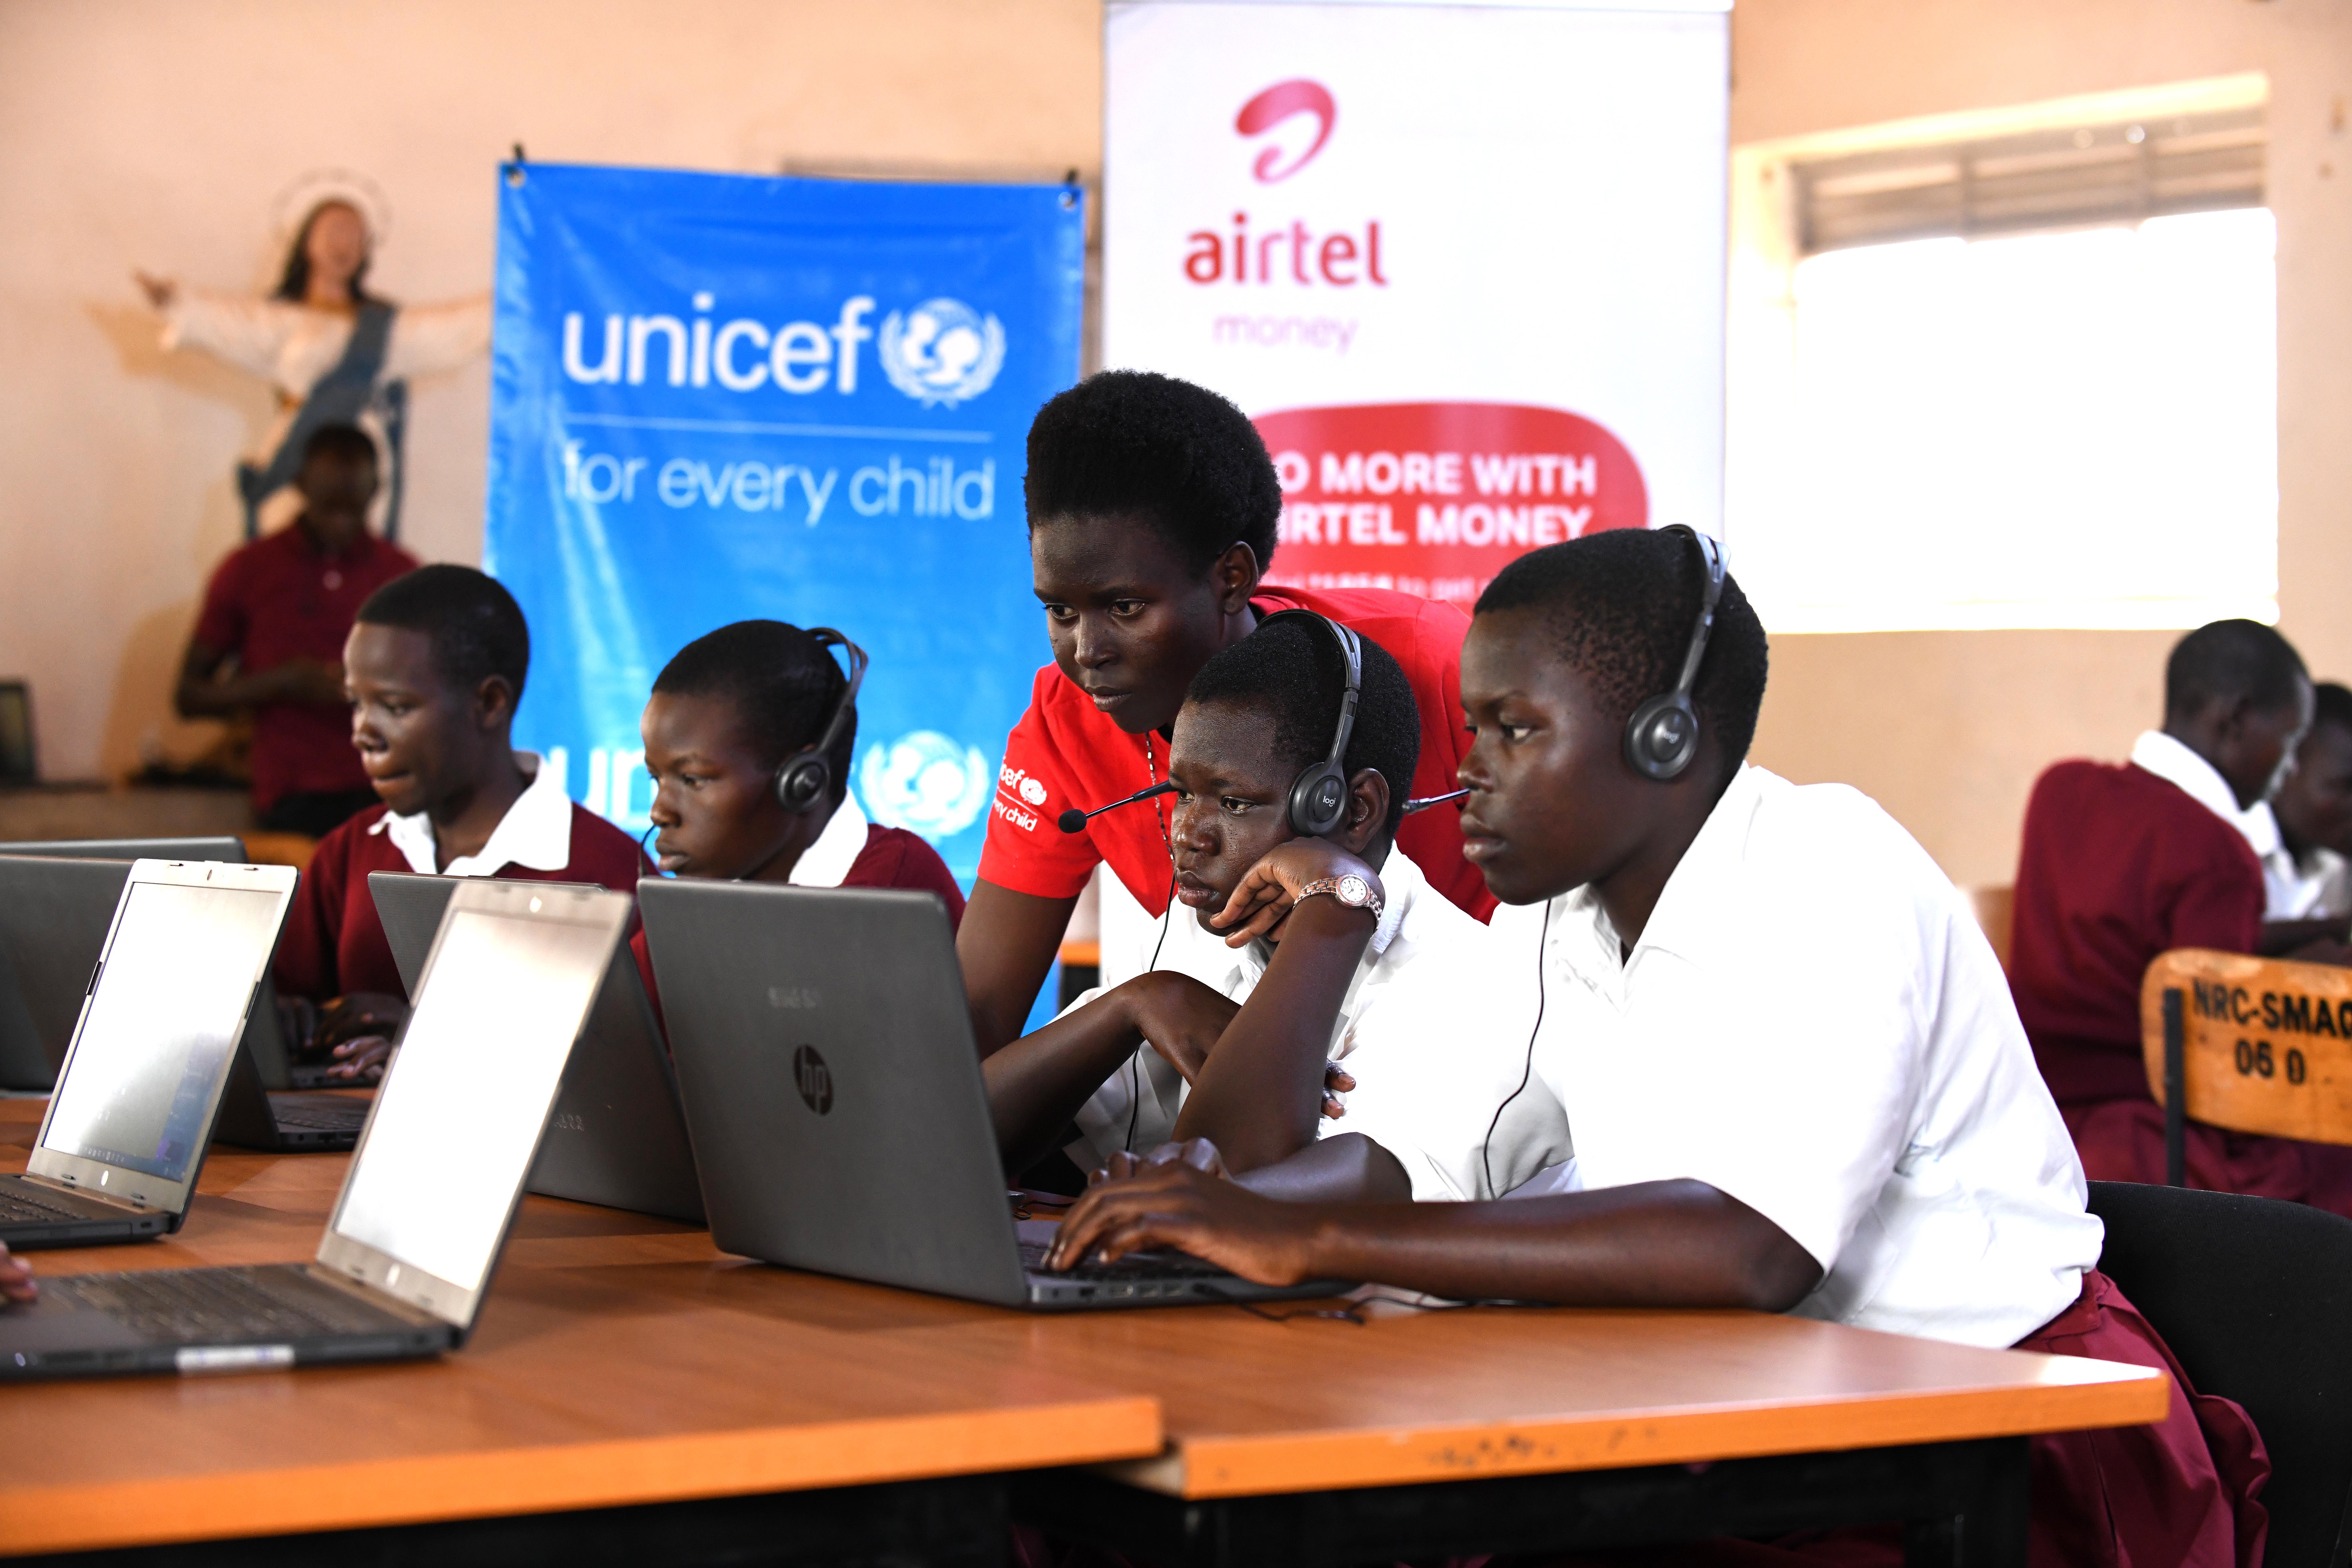 Airtel and UNICEF join efforts to improve access to digital learning in underserved schools in Uganda.